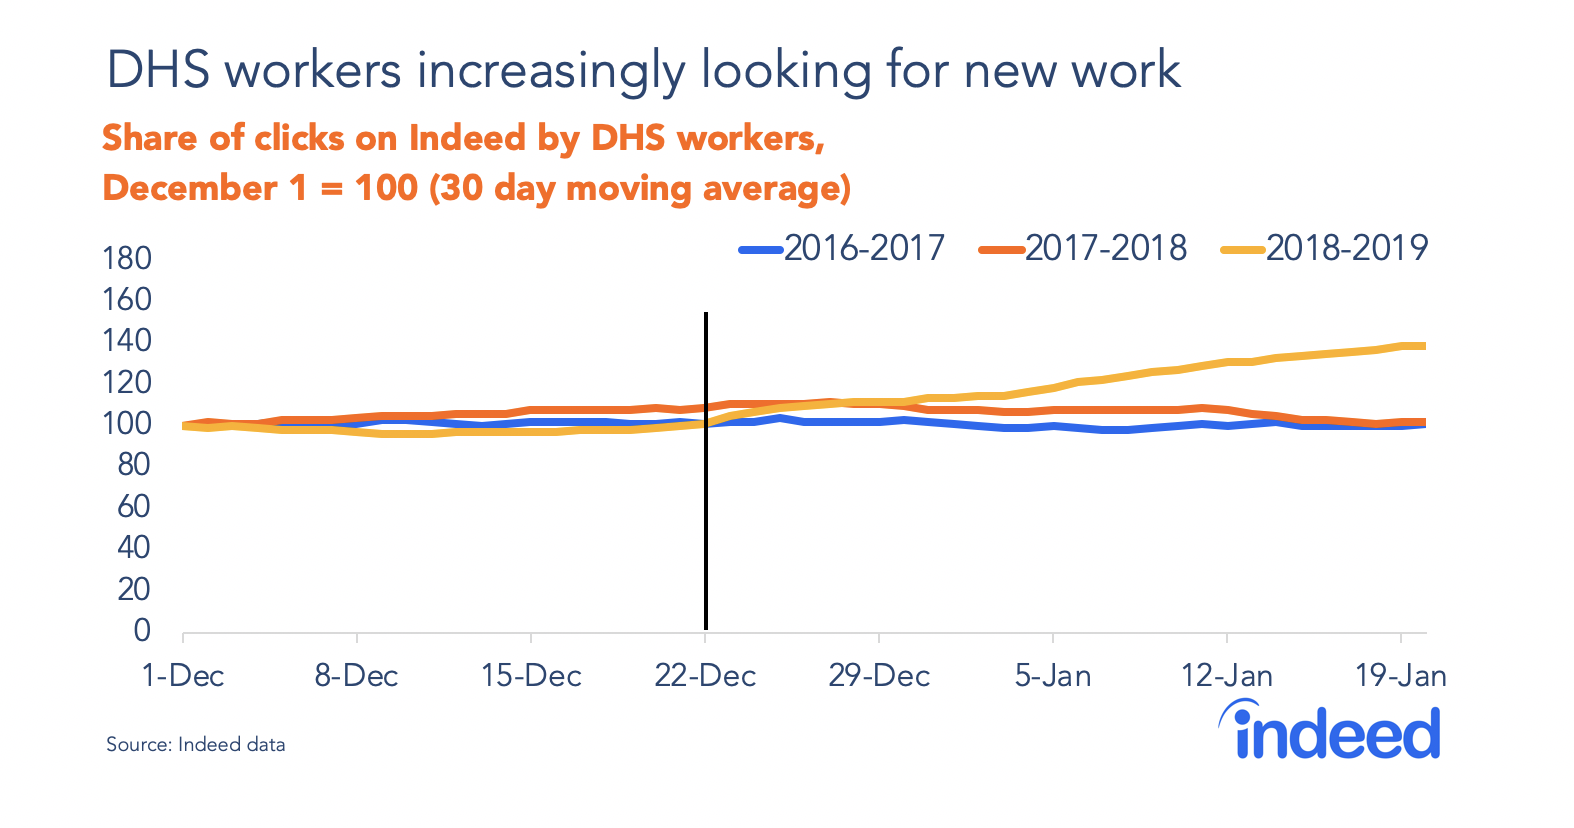 DHS workers increasingly looking for new work